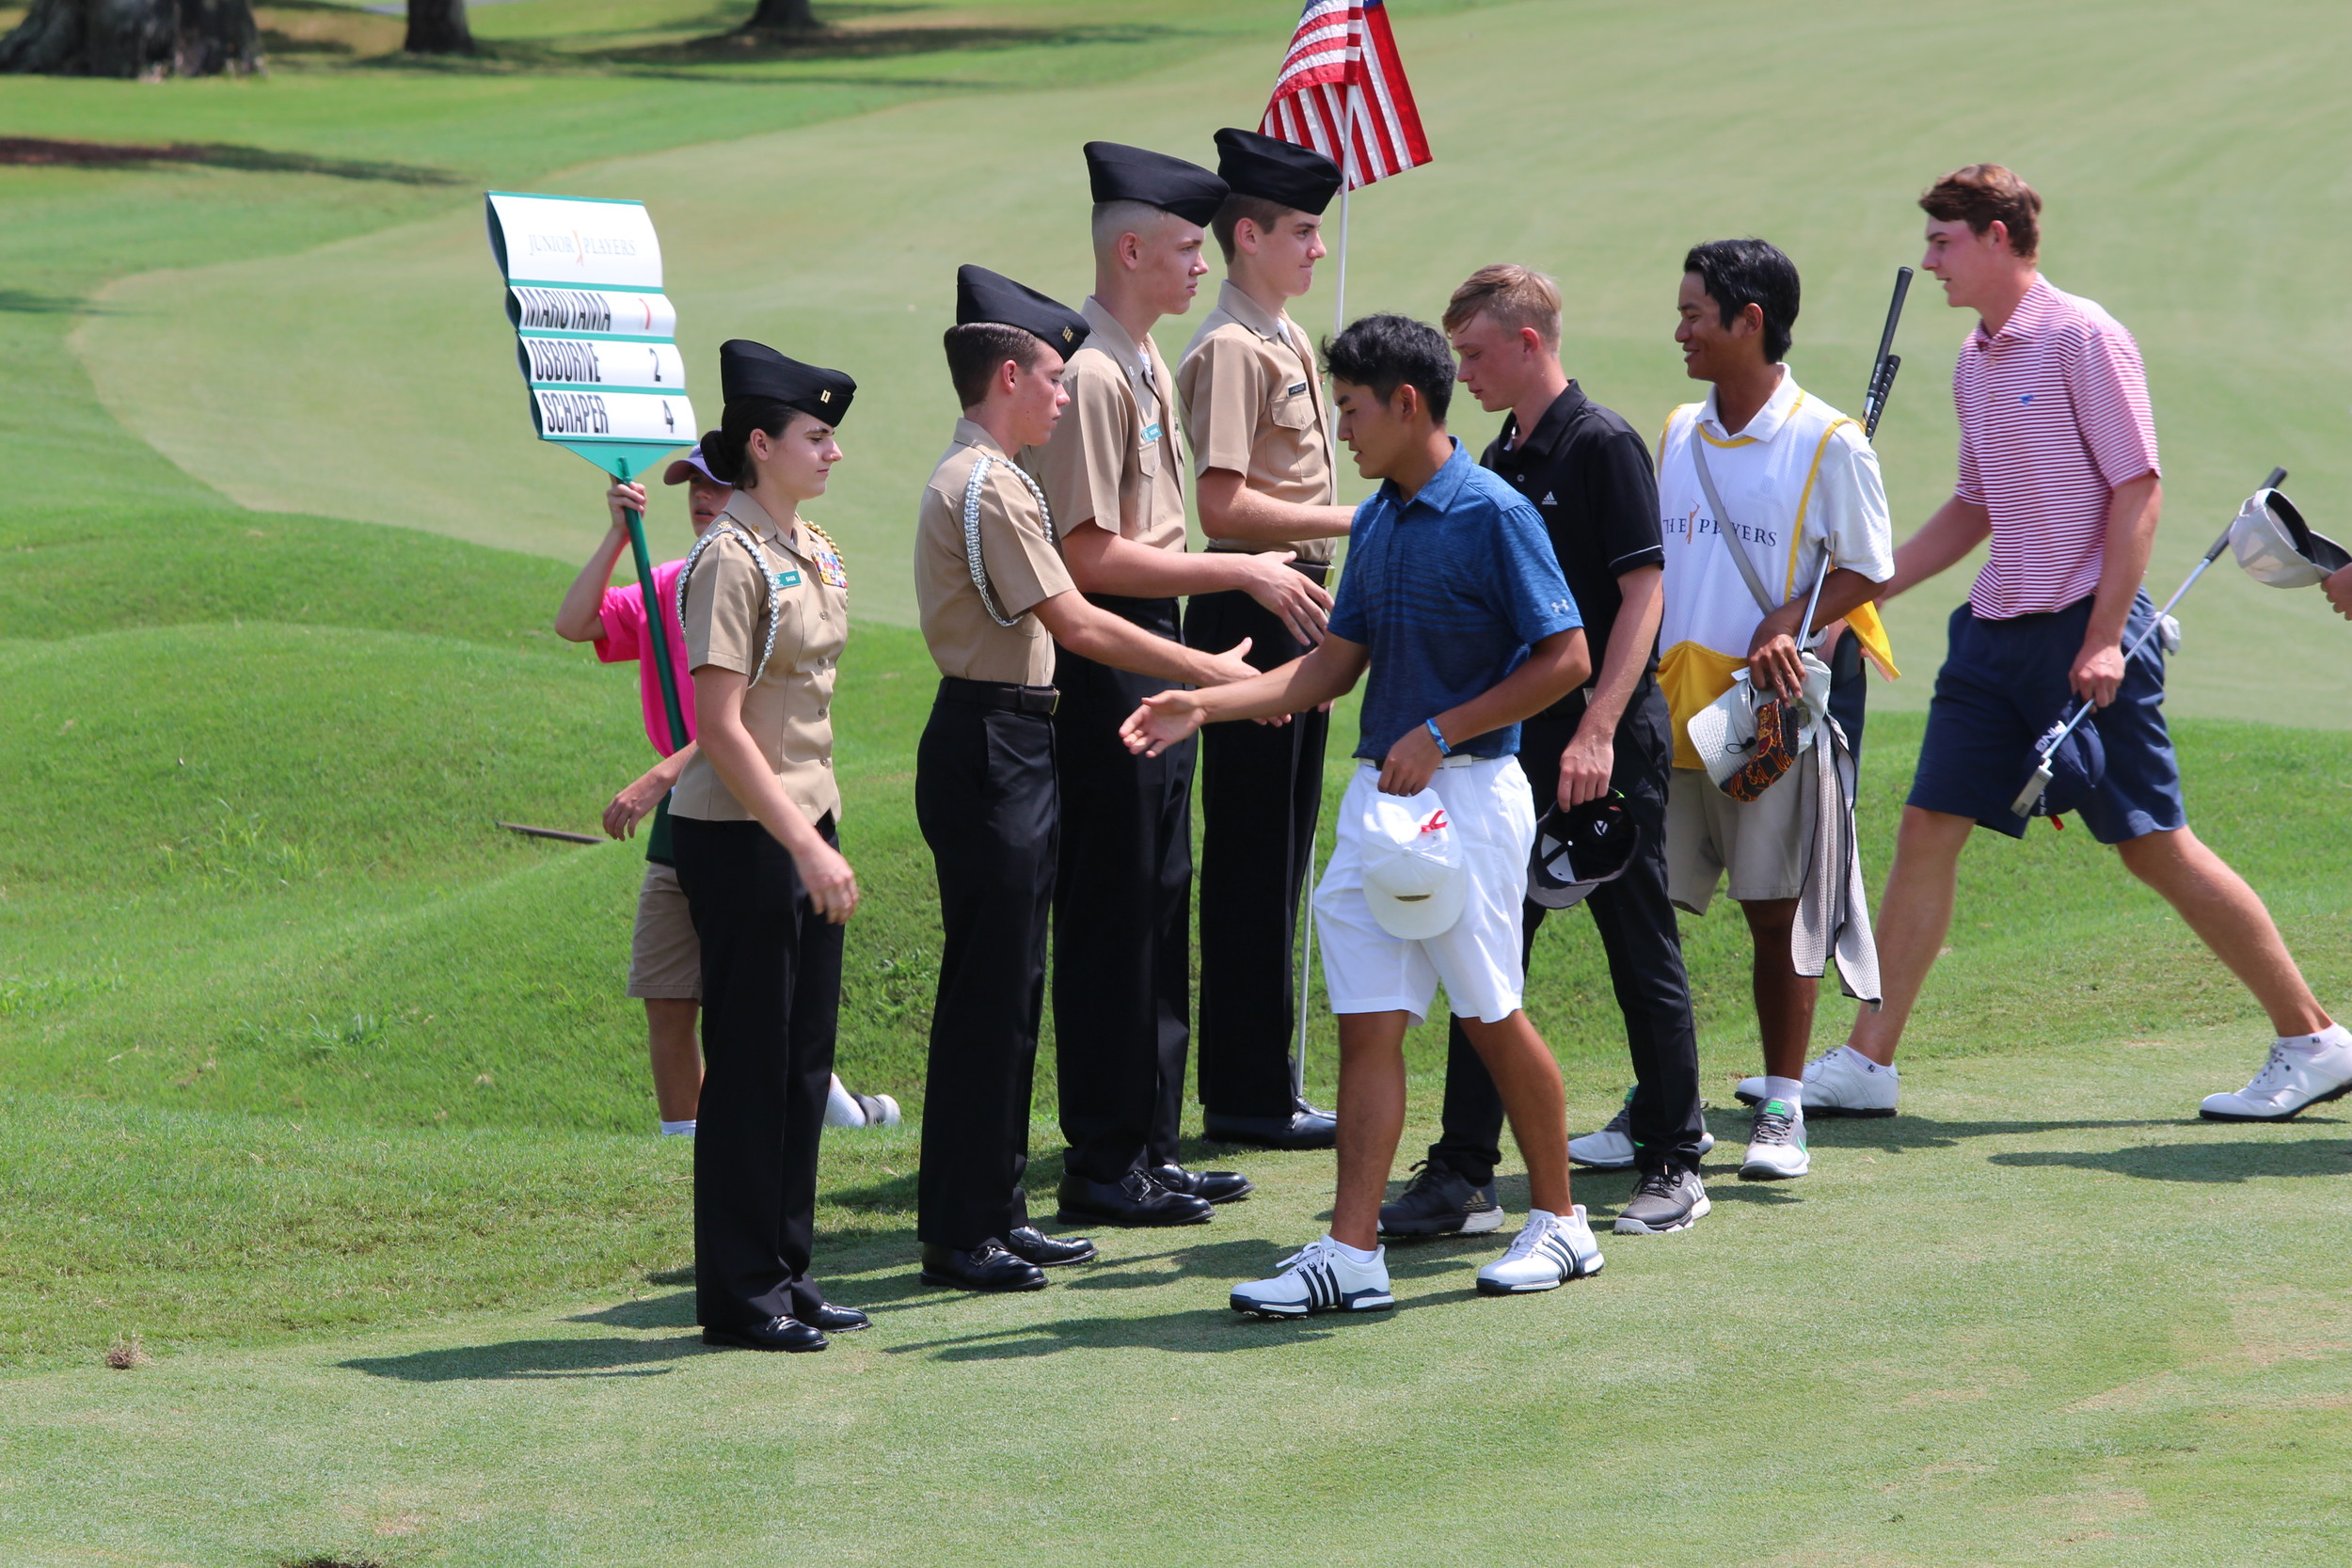 Nease NJROTC cadets Erin Sass (from left), Troy Barber, Will Moore and Ryan Landeweer participate in the No. 18 hole pin tending during the final round of the Junior PLAYERS Championship on Sept. 3, at THE PLAYERS Stadium Course at TPC Sawgrass.